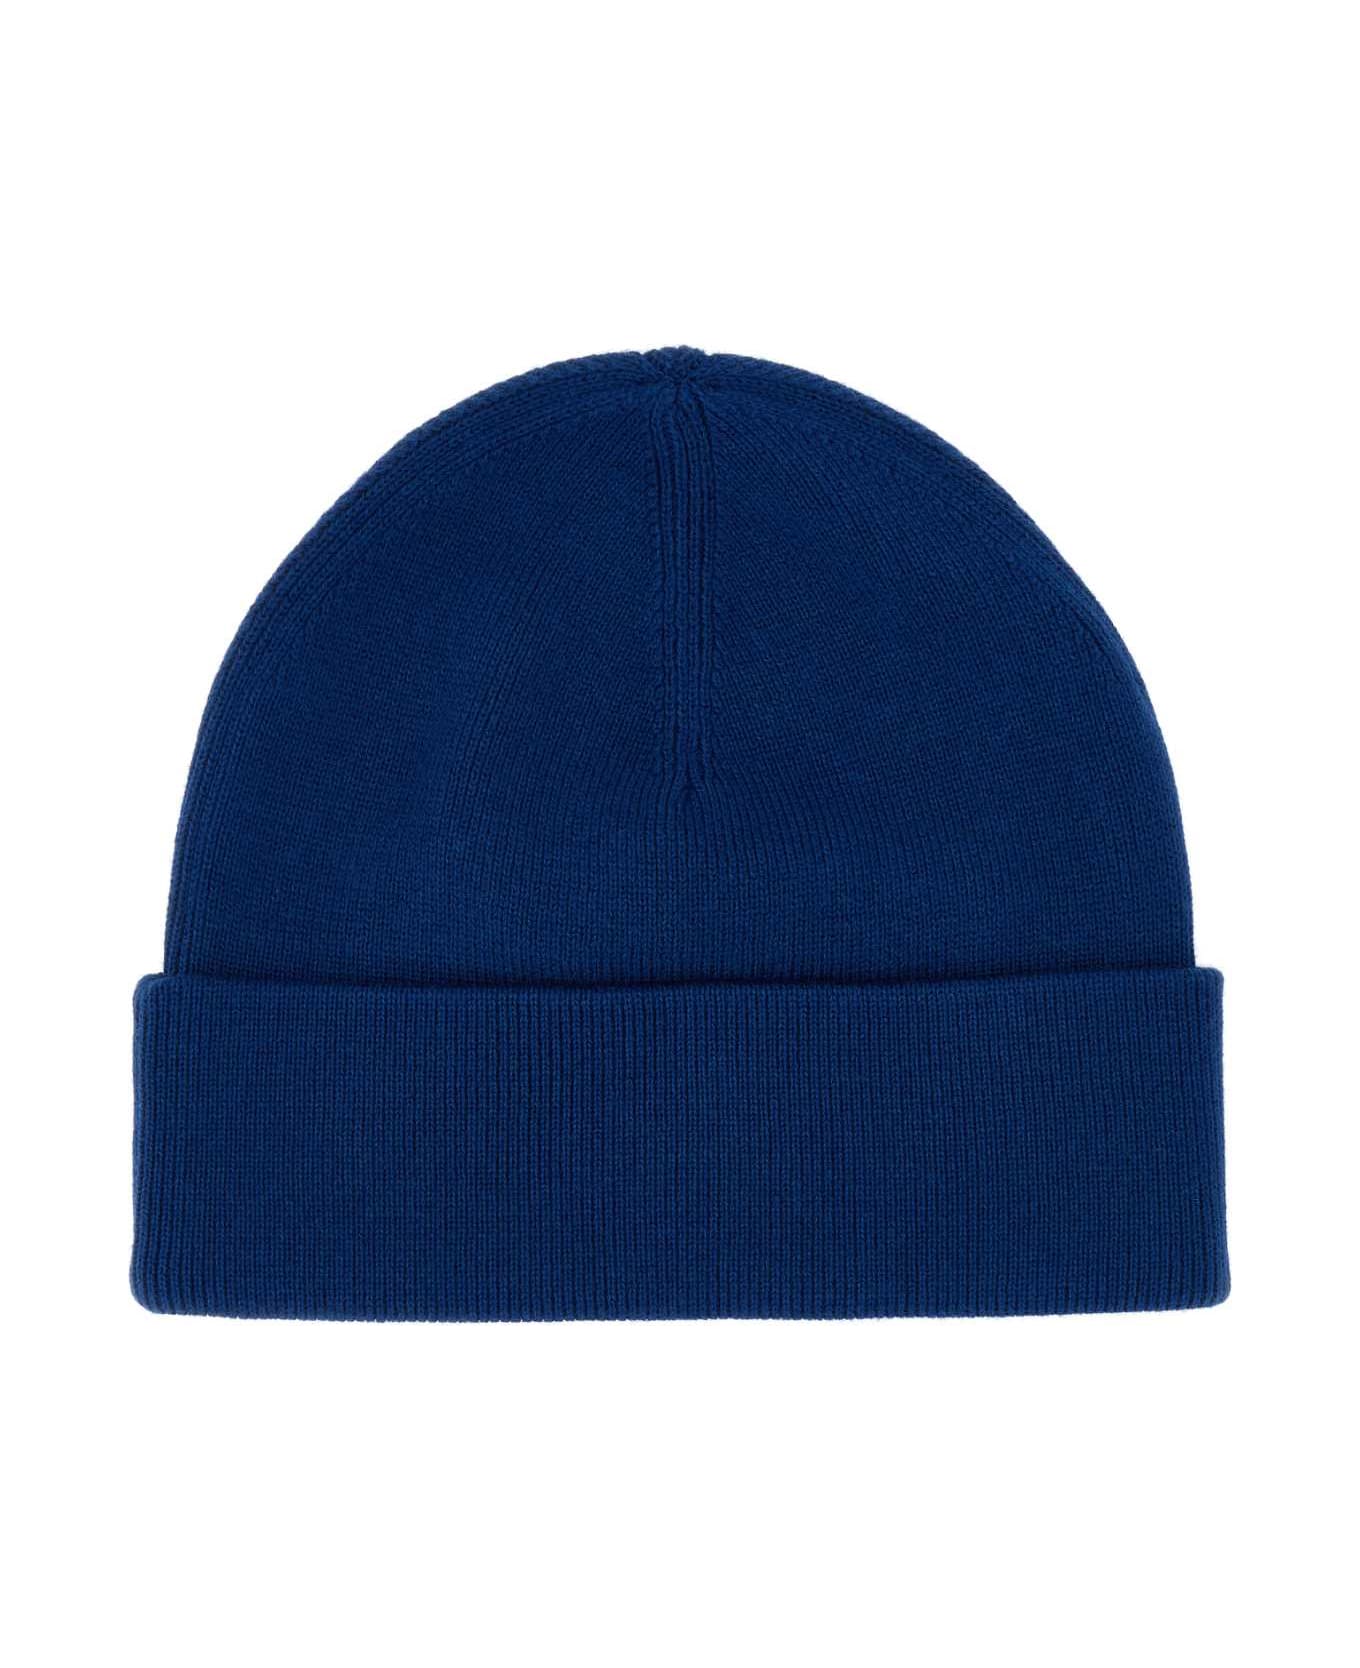 Fred Perry Electric Blue Wool Blend Beanie Hat - NAVY